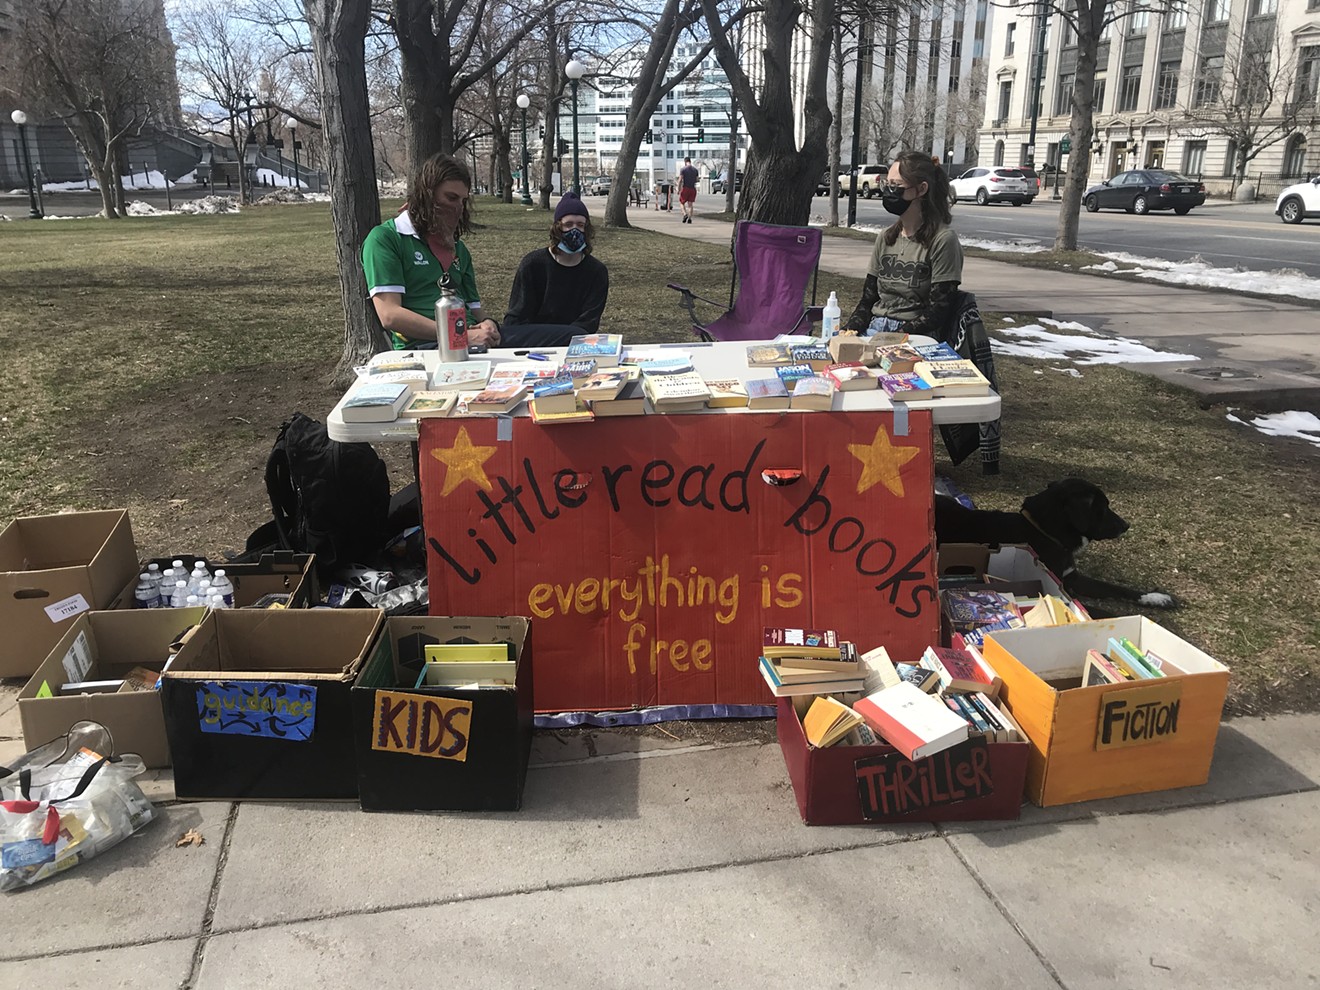 Little Read Books sets up a free book stand at the corner of Grant and Colfax every Saturday.